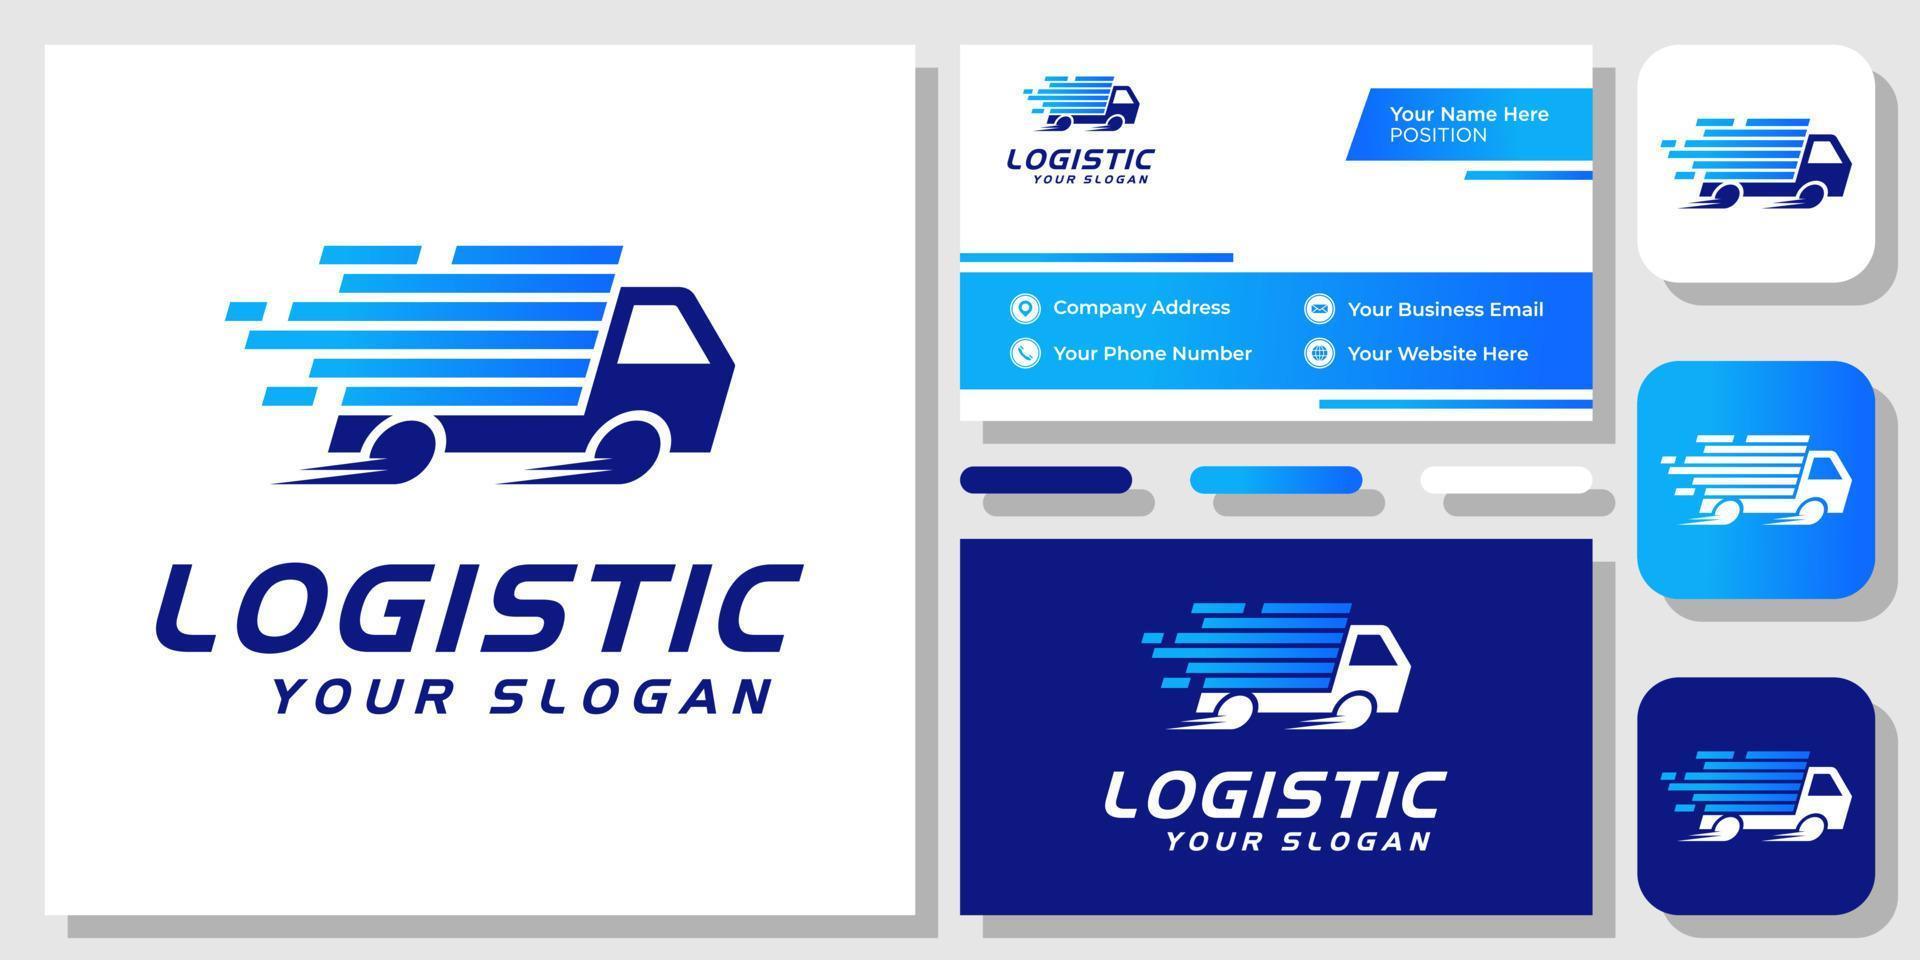 Car Box Truck Logistic Courier Delivery Shipping Express Cargo Logo Design with Business Card Template vector